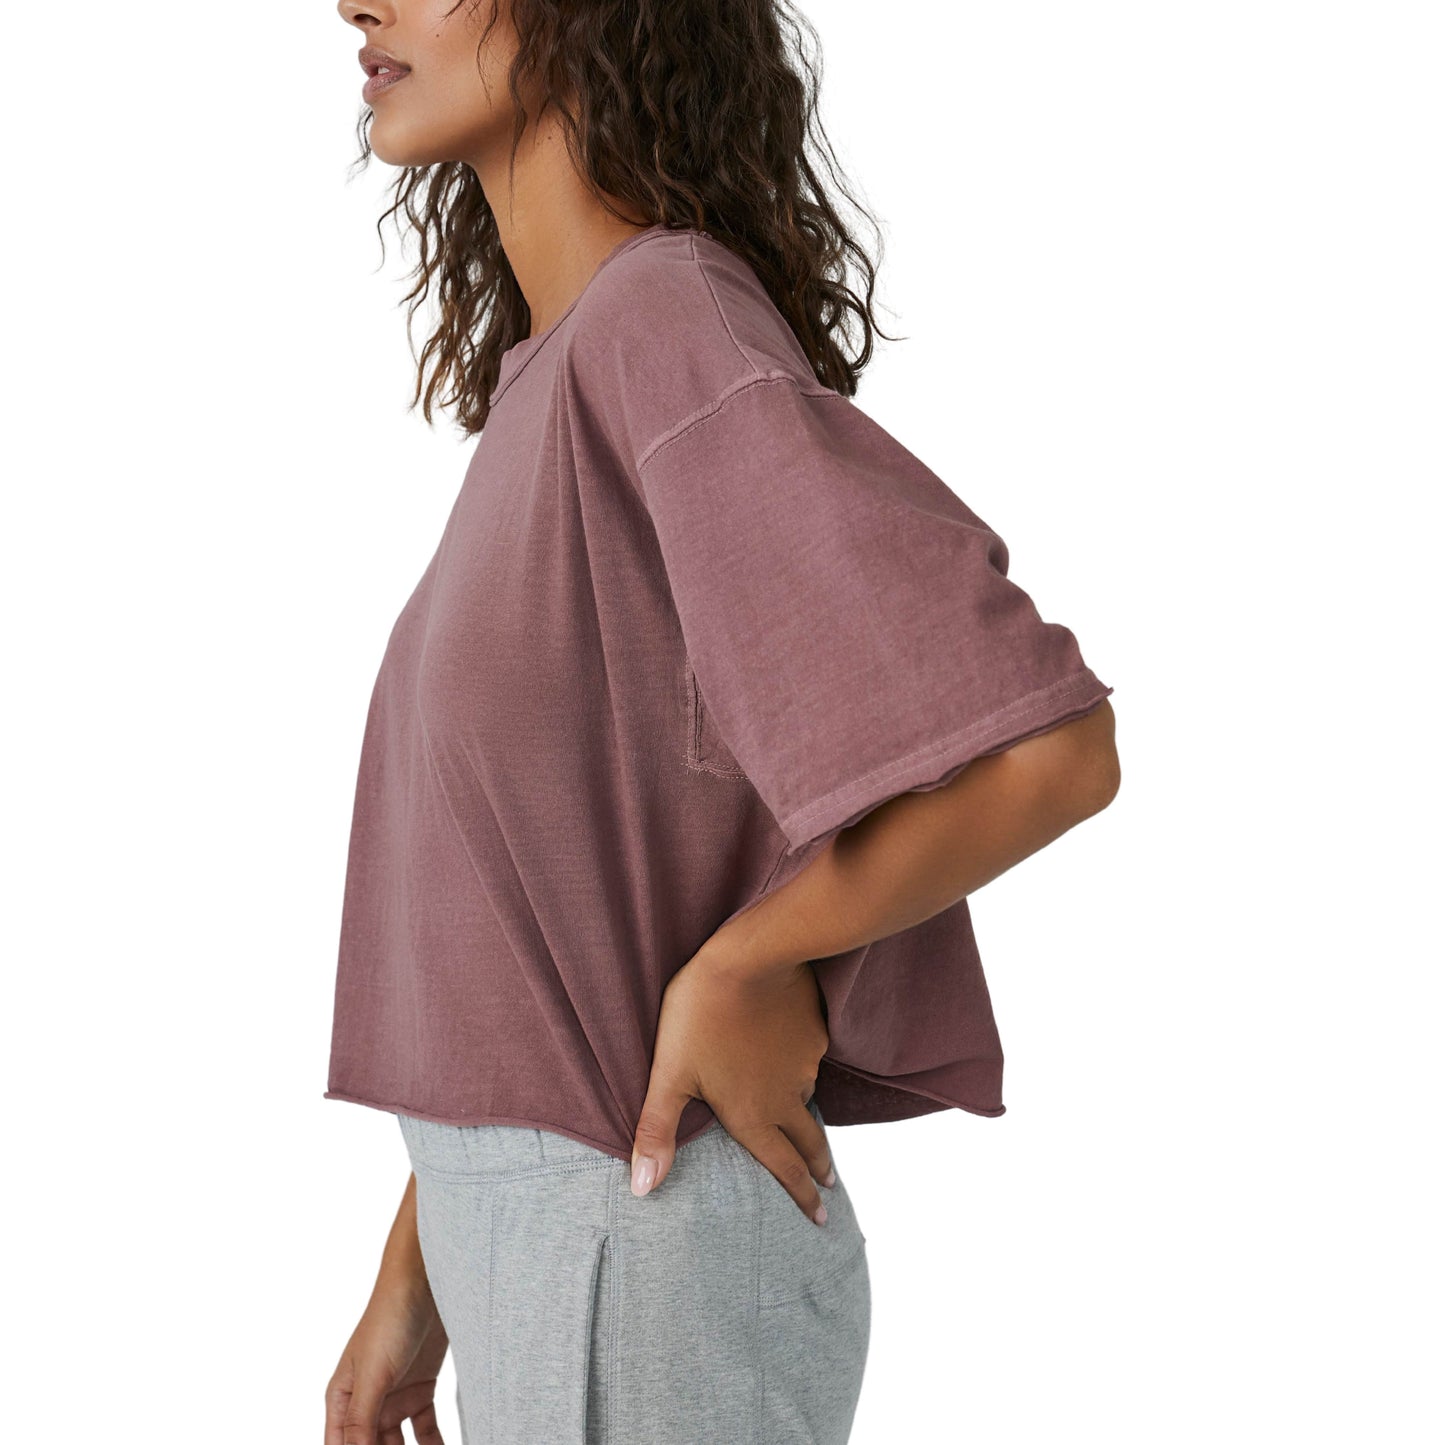 Side view of a woman wearing an oversized, dusty rose Free People Movement Inspire Tee and light gray sweatpants, with her hand partially tucked into her pocket.